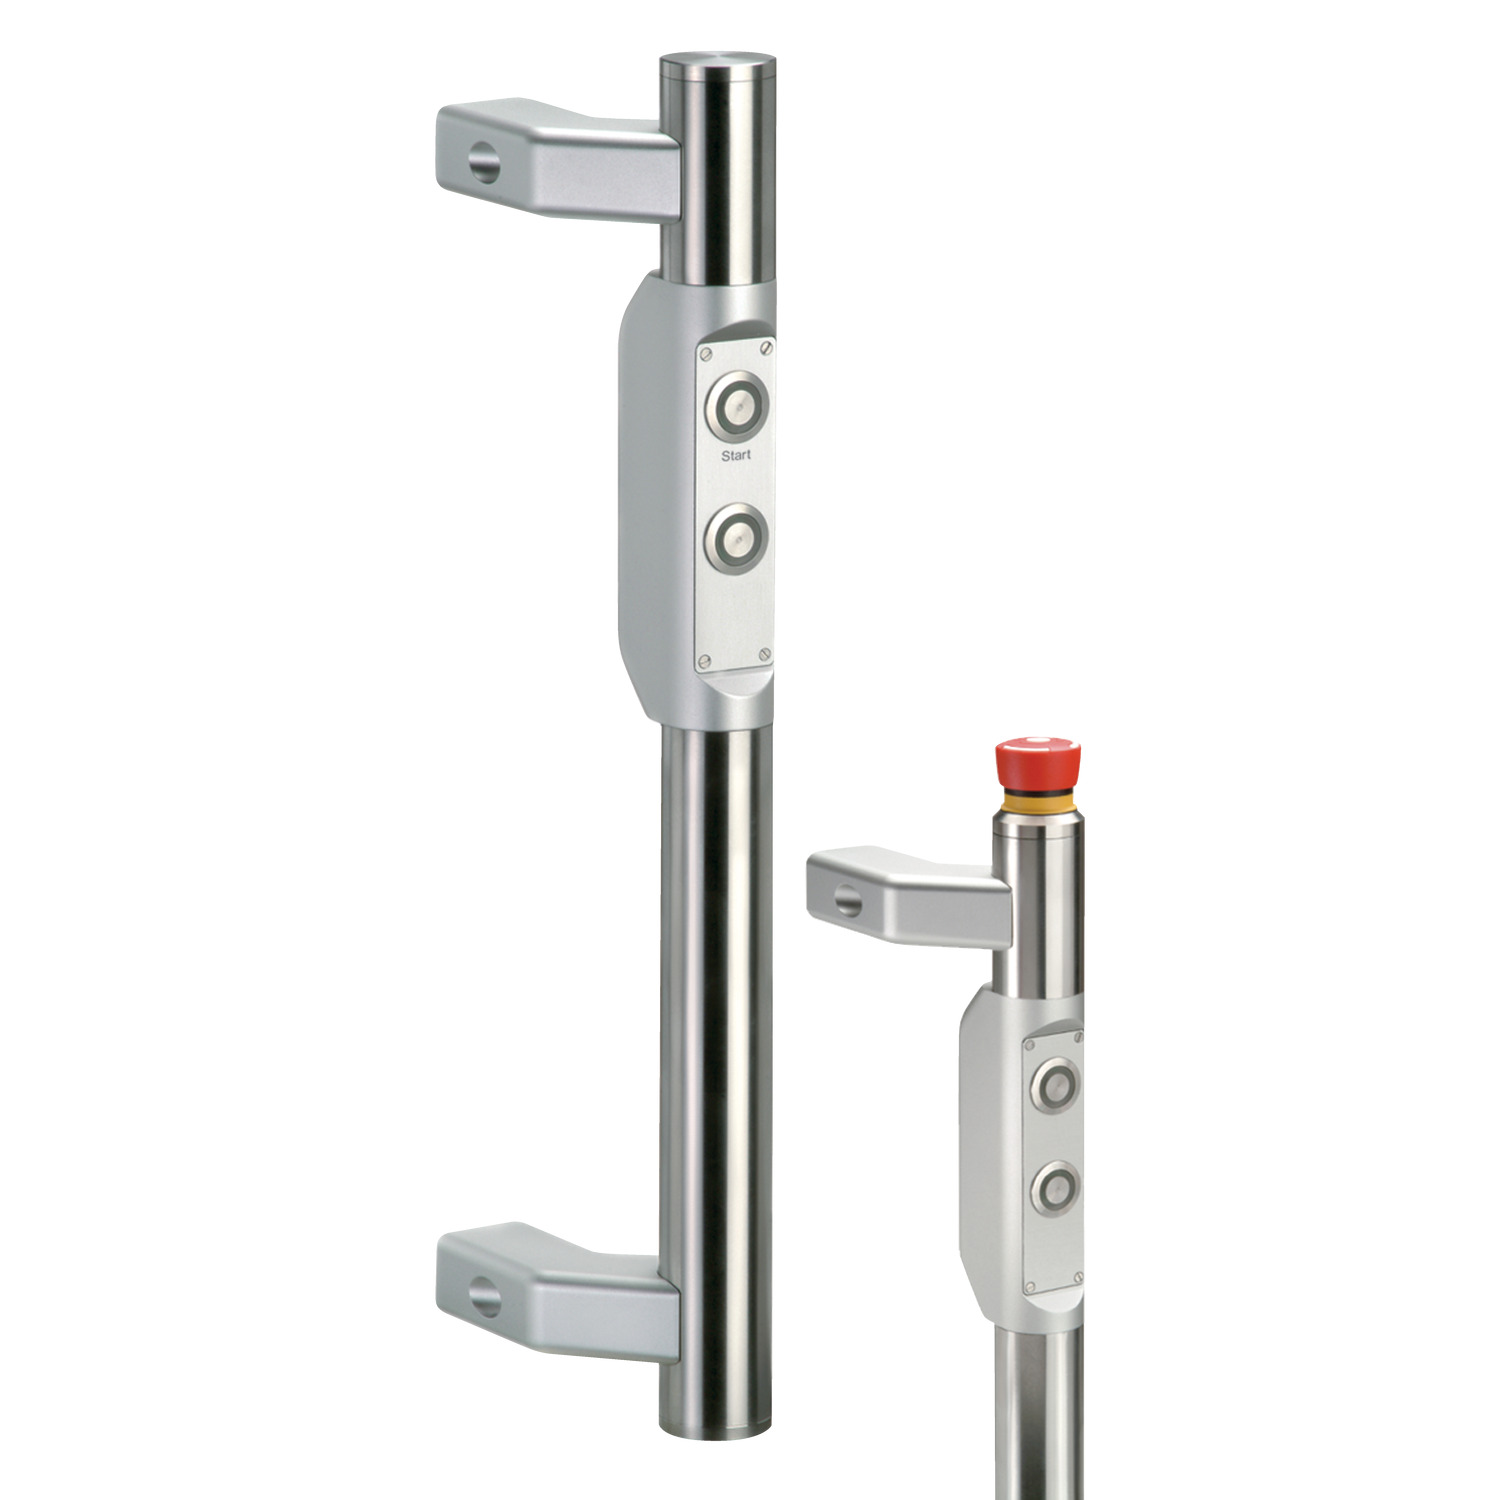 B8120.AC0000 Functional Handle - Electronic Type One - Left or Right. No switch - blank, to act as counter handle.